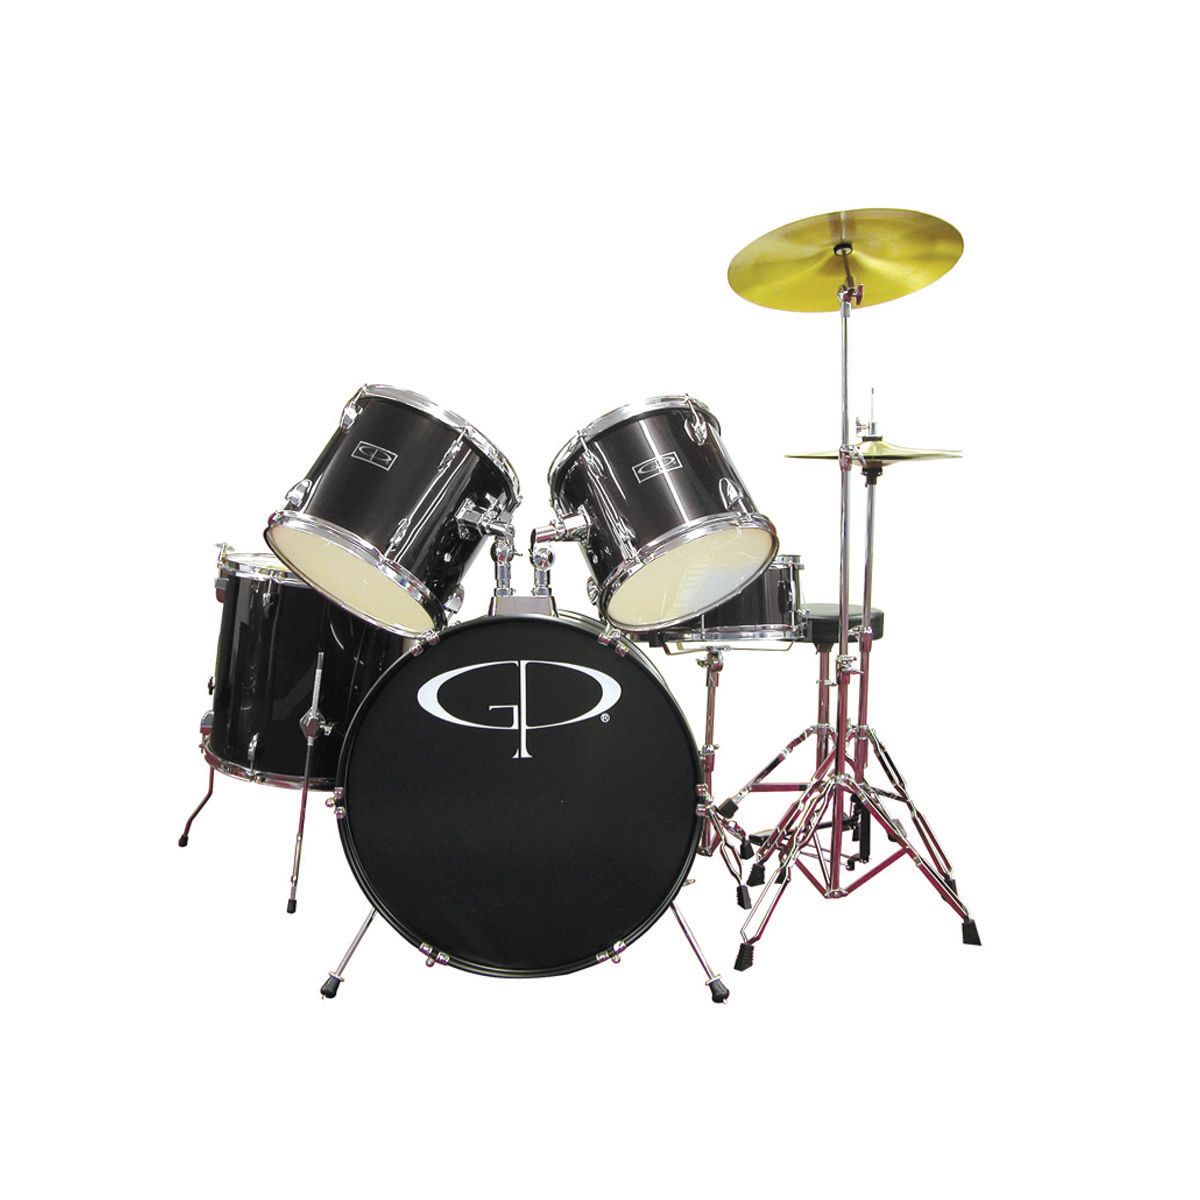 5-Piece Complete Drum Set with Accs in Black